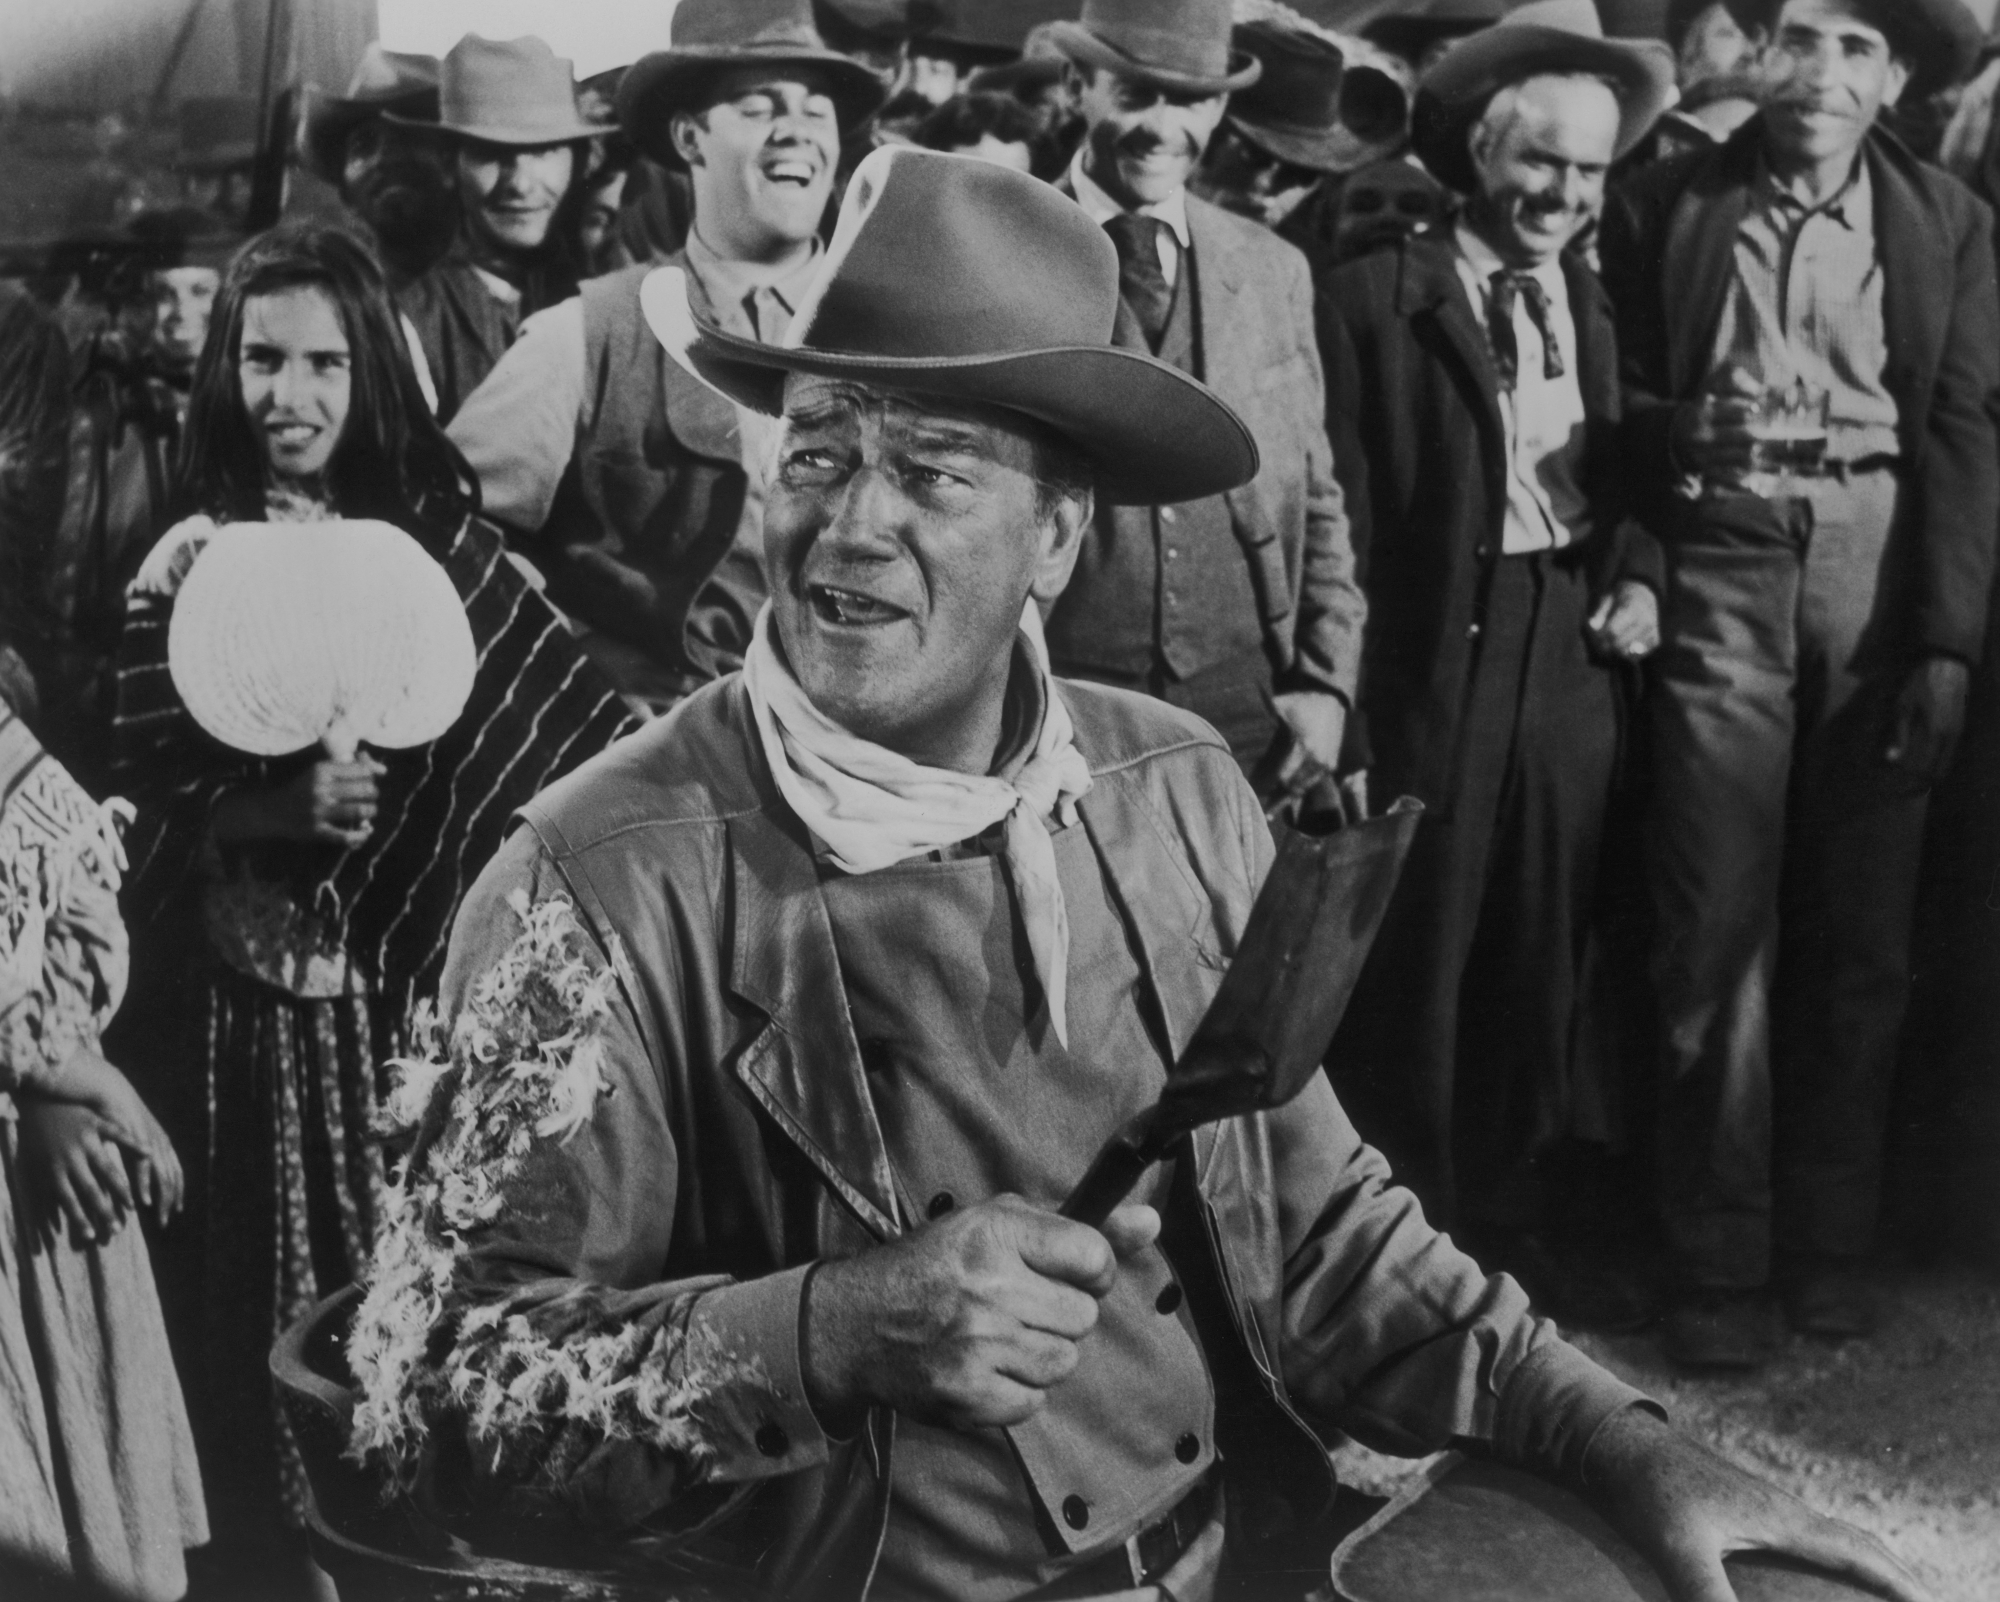 John Wayne as George Washington 'G.W.' McLintock in 'McLintock!' wearing his costume, looking to the side, standing in front of group of people